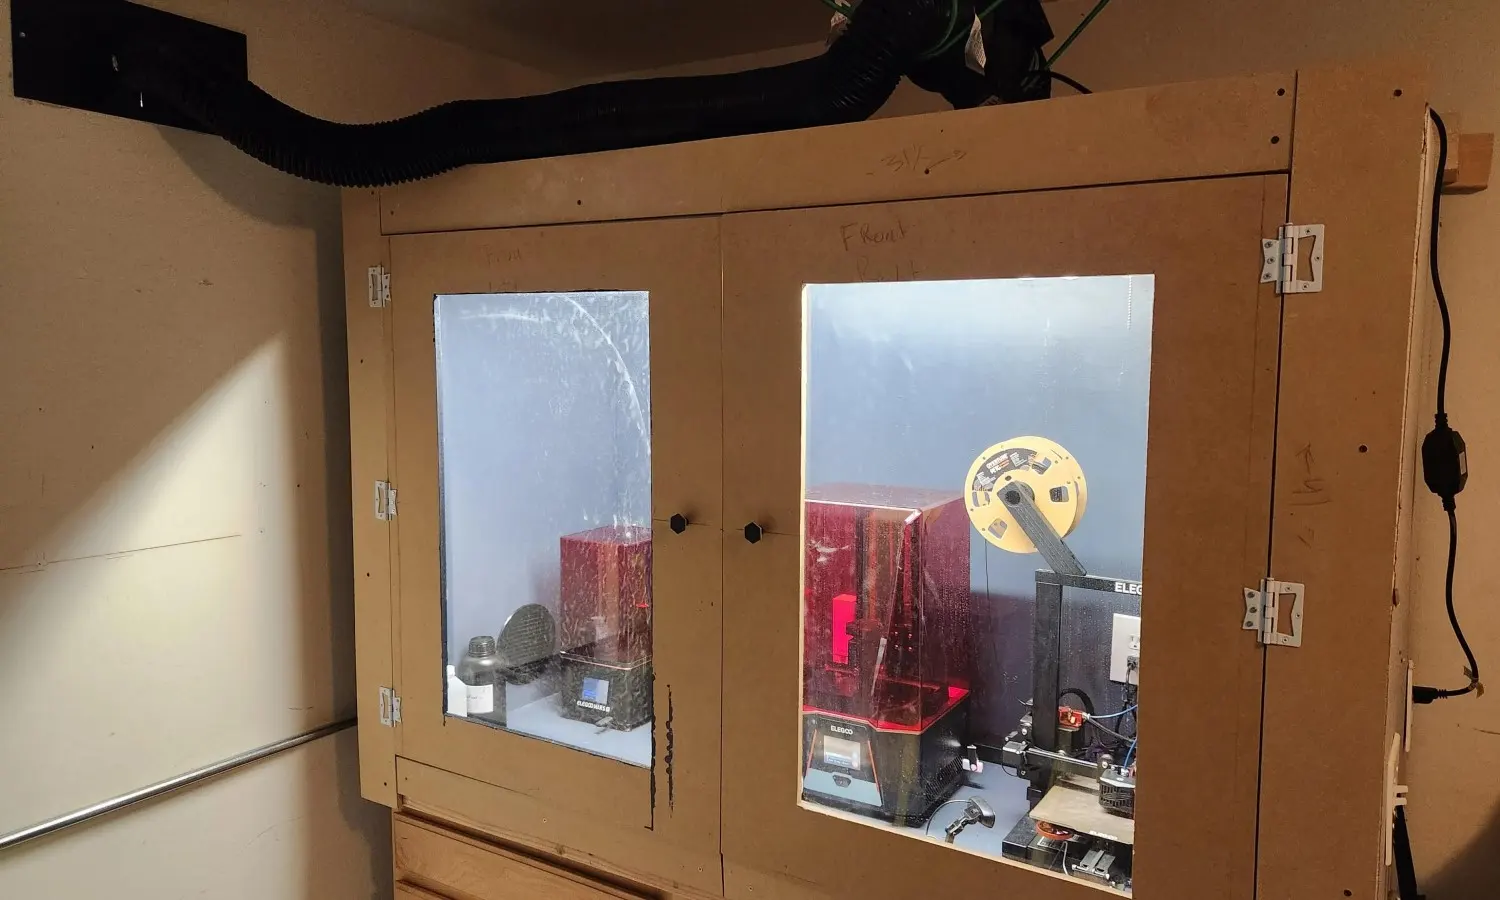 Community resin setups with a wooden enclosure indoors and ventilation duct